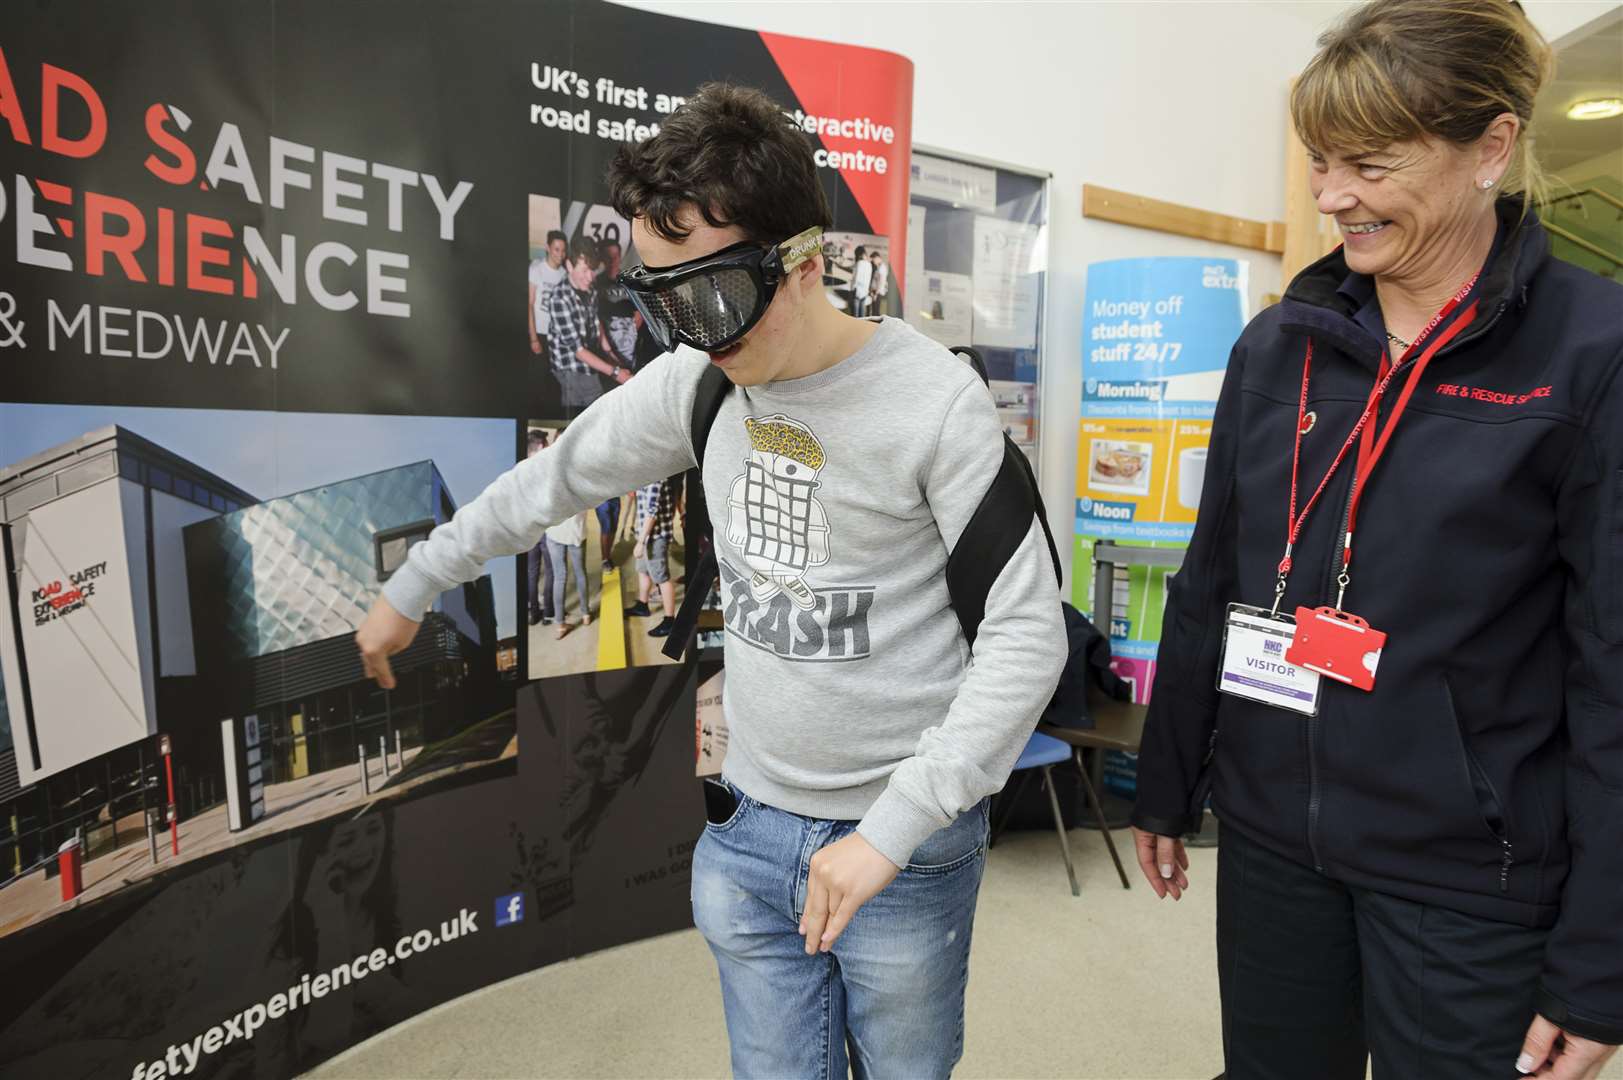 Harvey Boulding finds out how difficult walking the line is with the drugs goggles on, watched by Kerrie Moncrieff, Road Safety Officer for KFRS